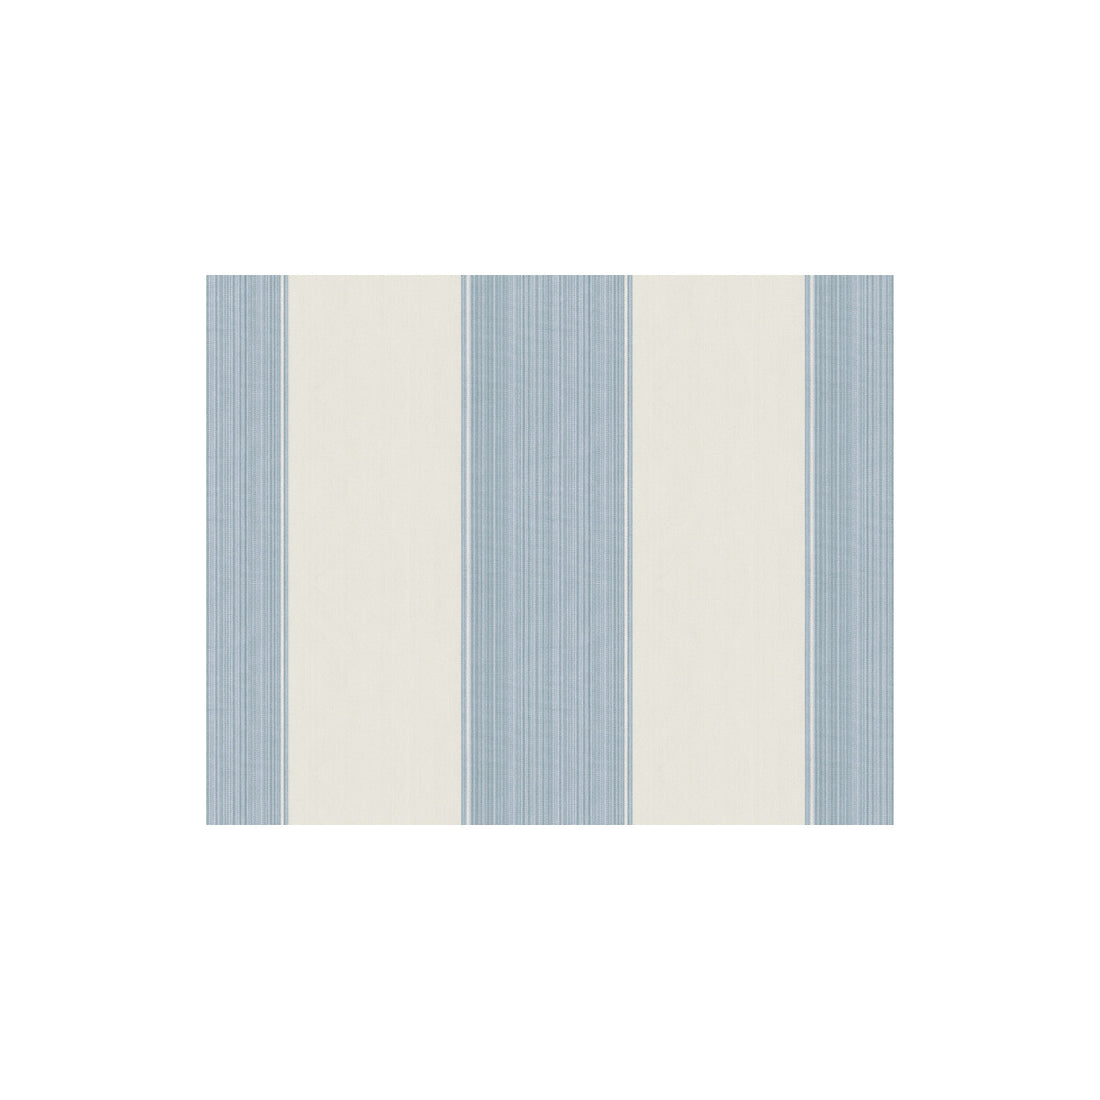 Granby fabric in chambray color - pattern 32997.15.0 - by Kravet Basics in the Sarah Richardson Affinity collection